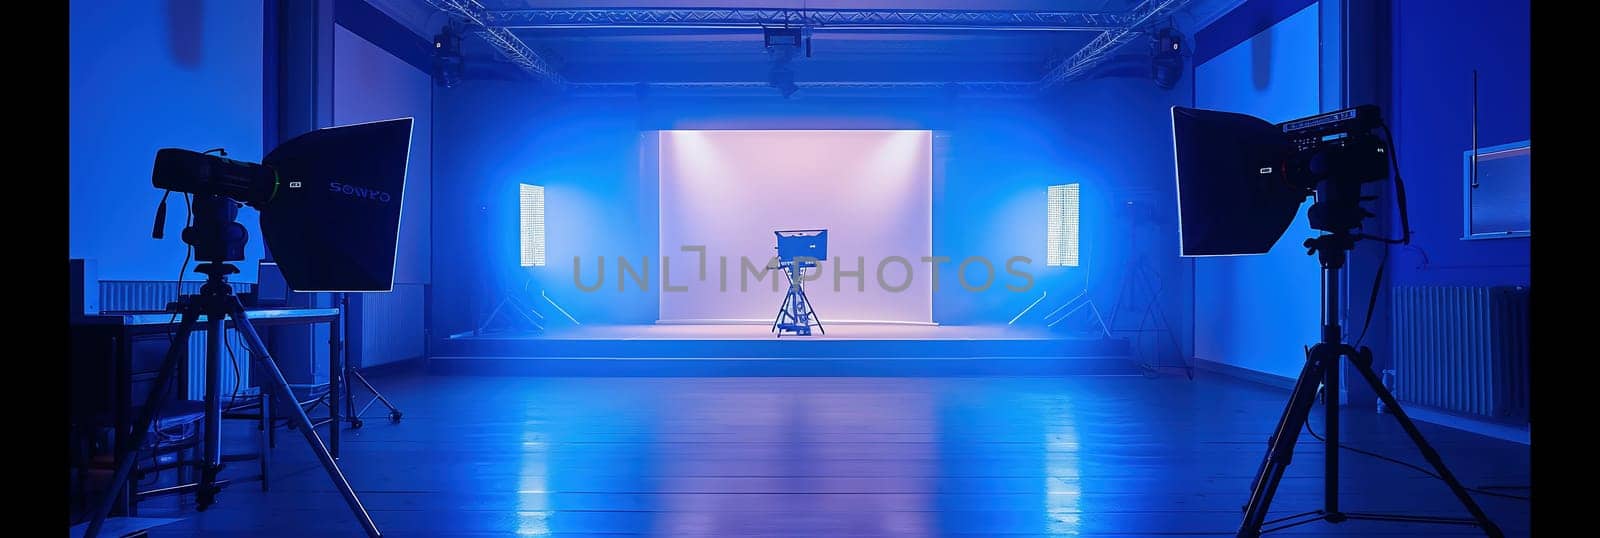 Large Pavilion Interior of Modern Film Studio with Blue Screen and Light Equipment. 3D Rendering by Andelov13